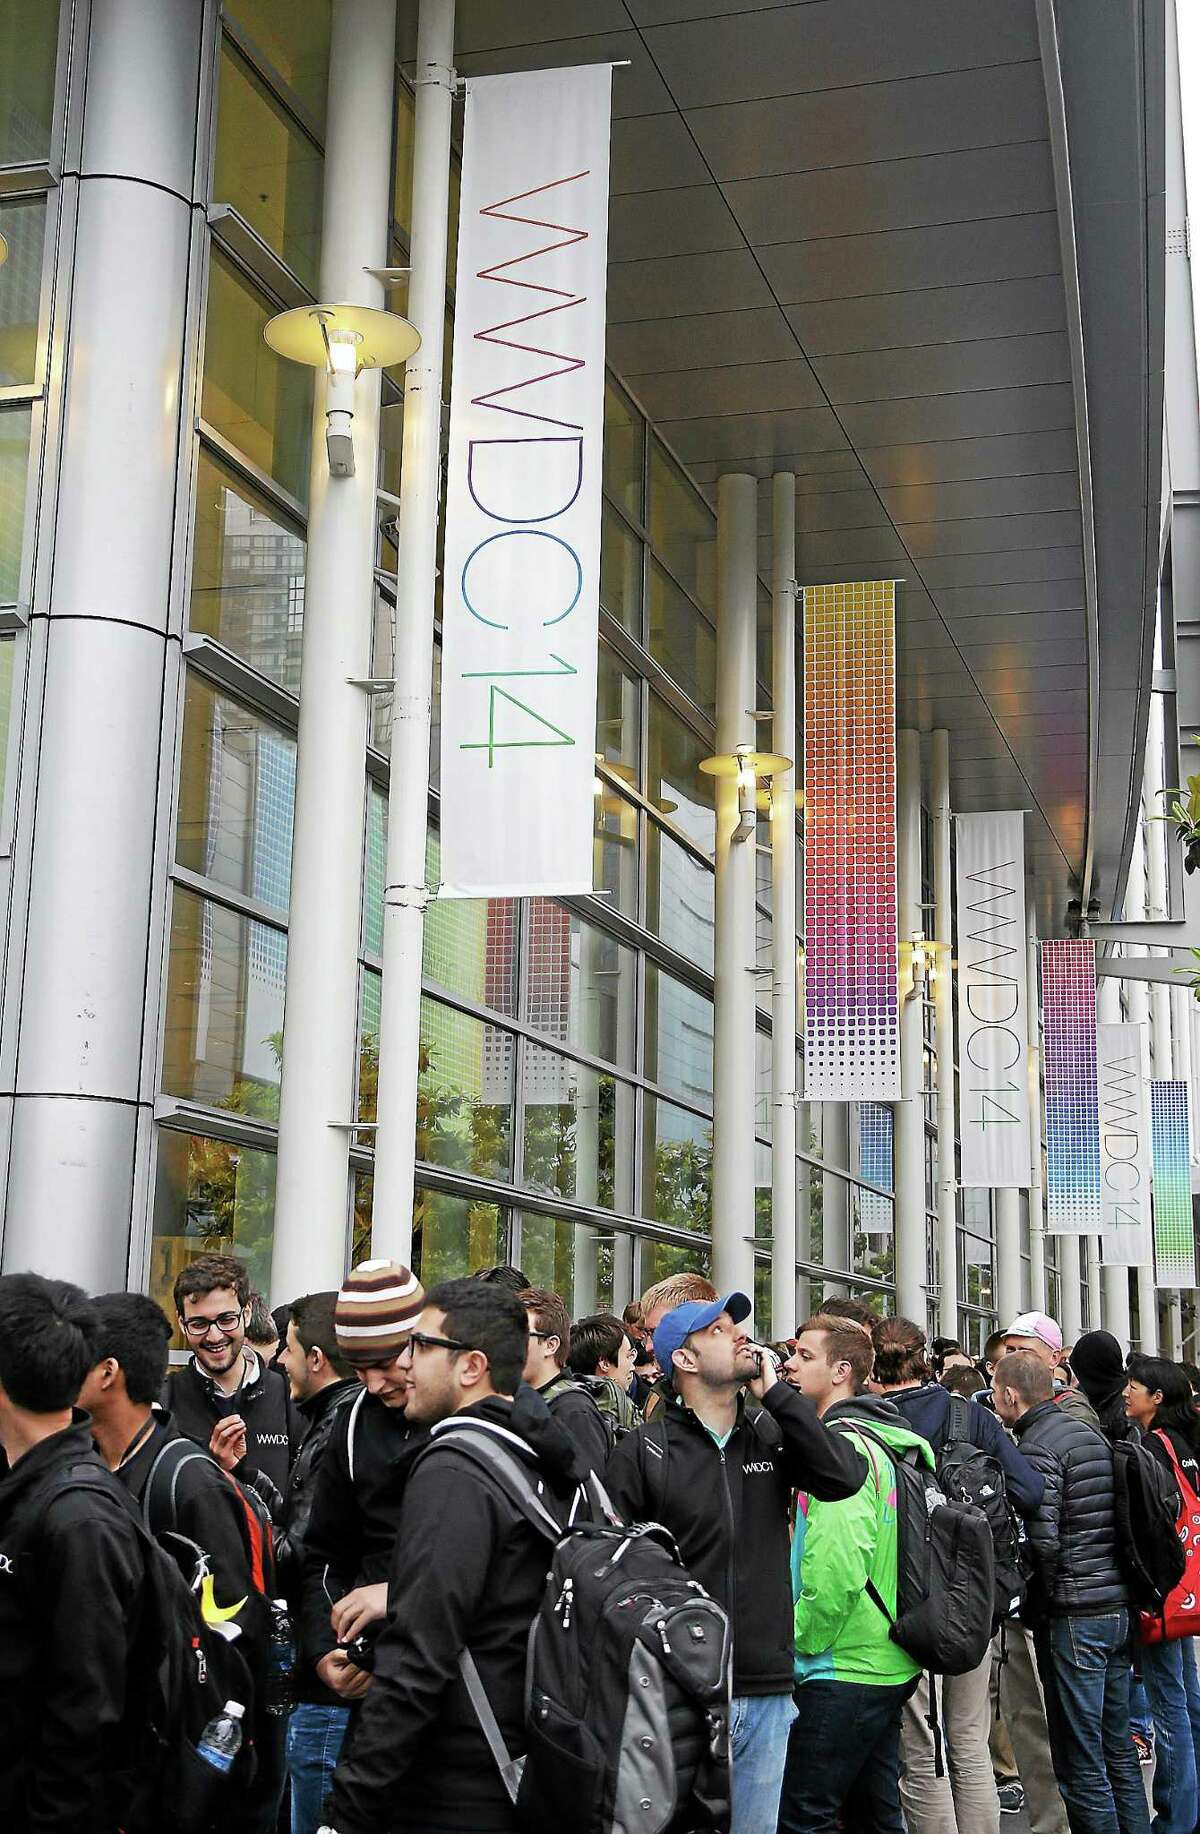 A crowd lines up before the Apple Worldwide Developers Conference 2014 at the Moscone Center in San Francisco on June 2, 2014.